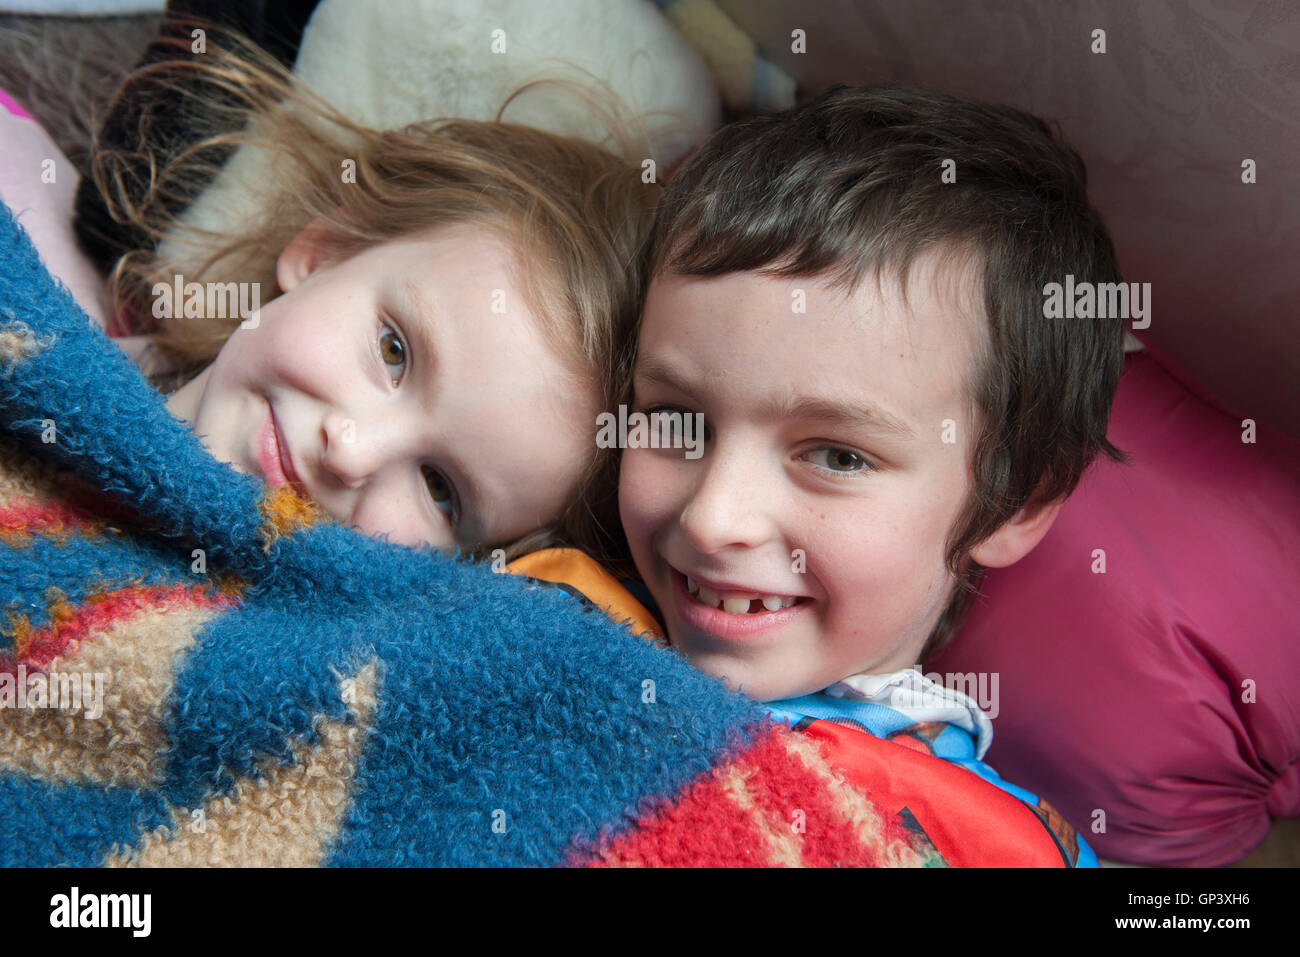 Young siblings lying under blanket together, portrait Stock Photo